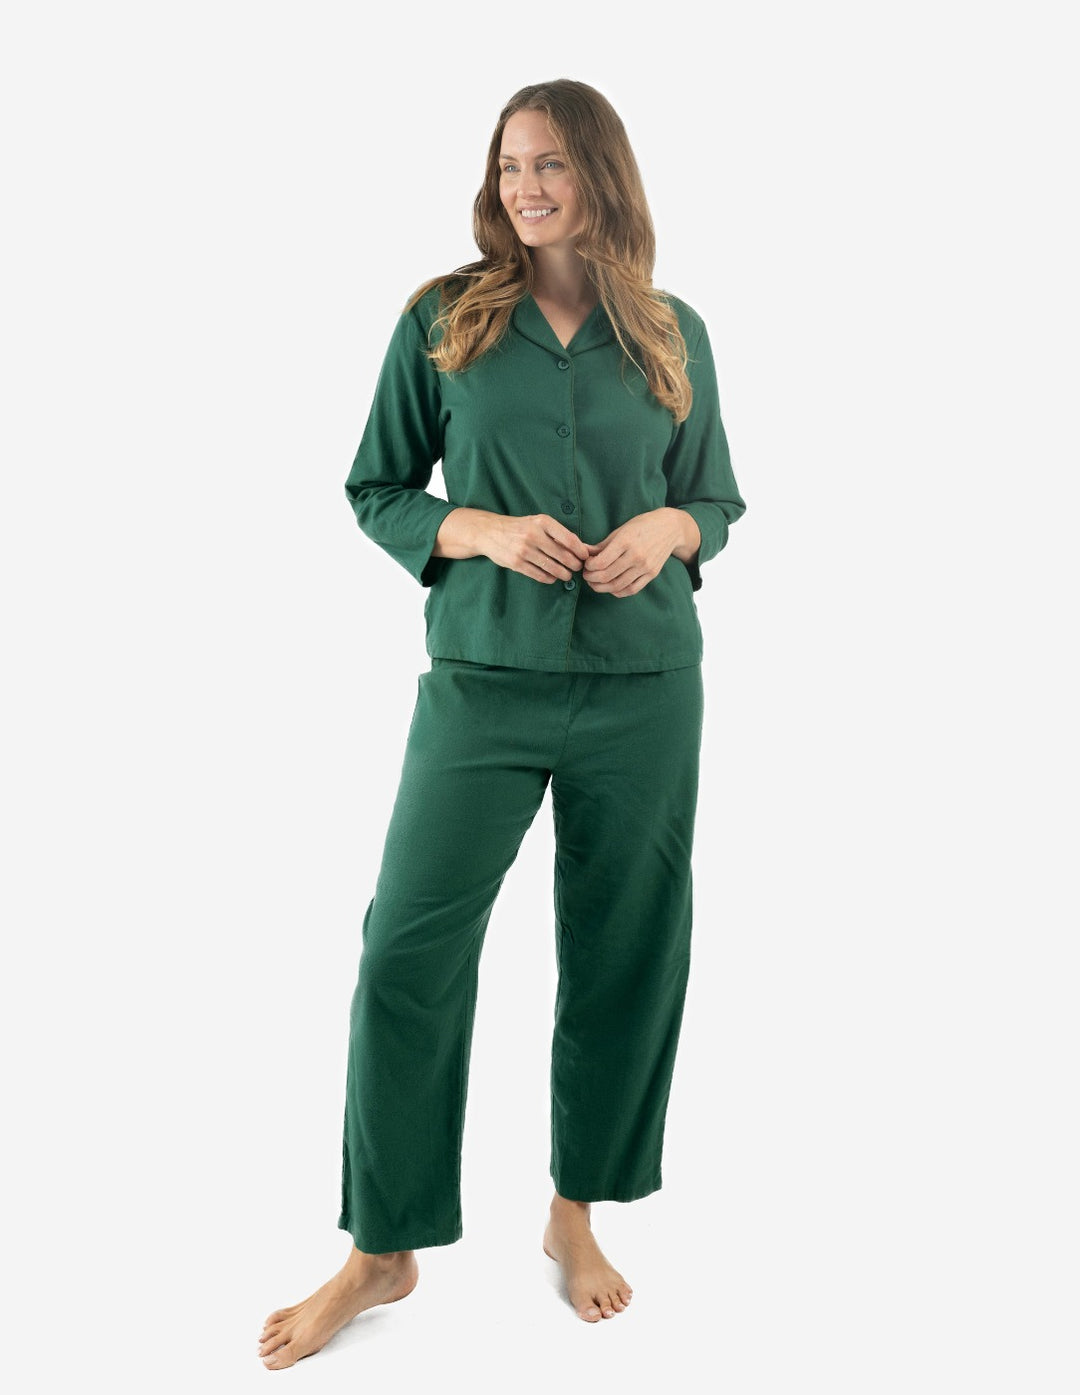 solid green flannel button down women's pajamas